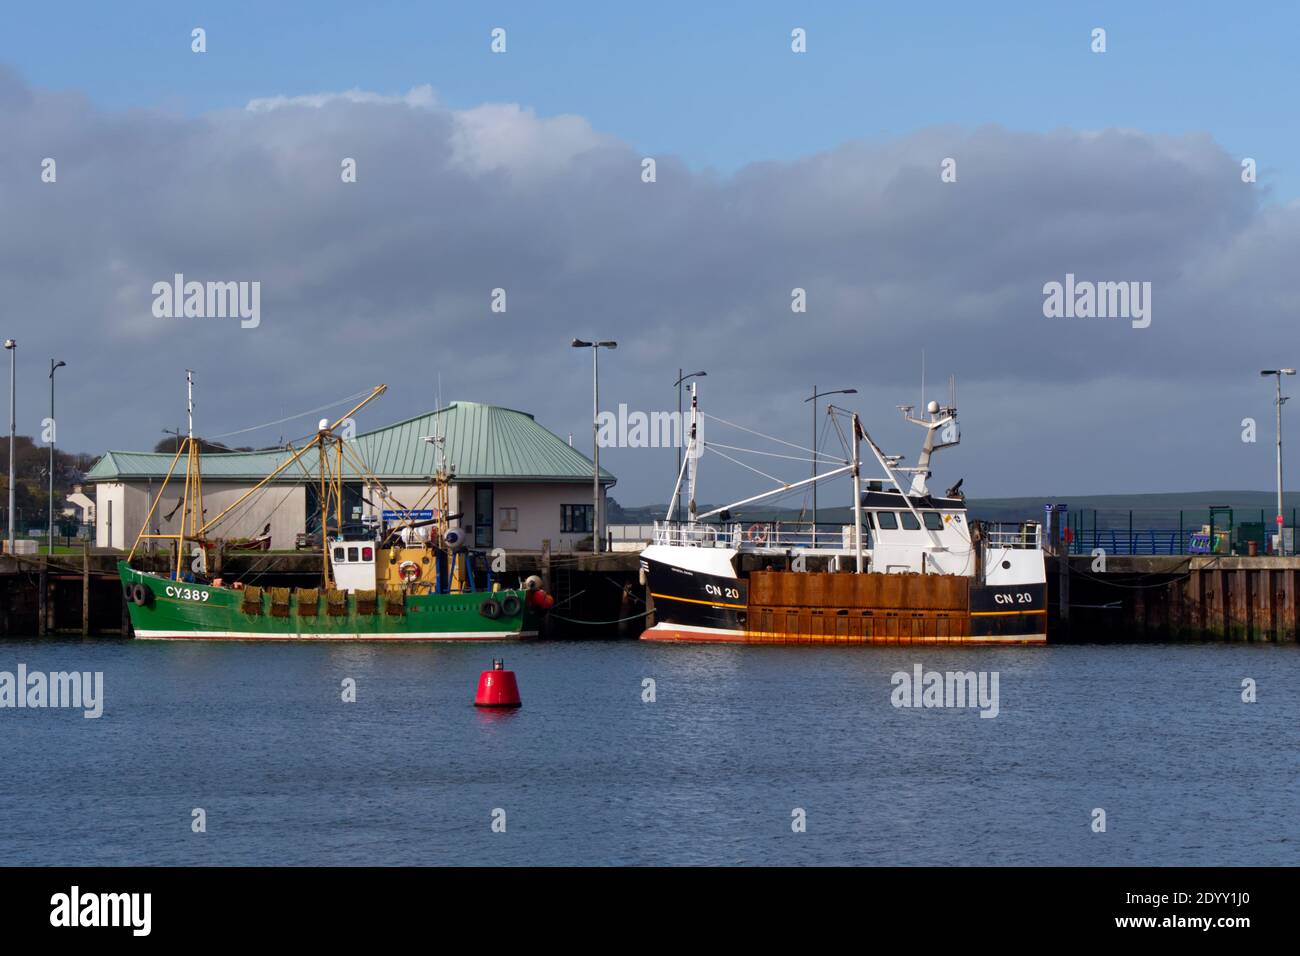 scallop trawler fishing boats CY389 and CN20 in Stranraer Harbour,Dumfries and Galloway, Scotland Stock Photo